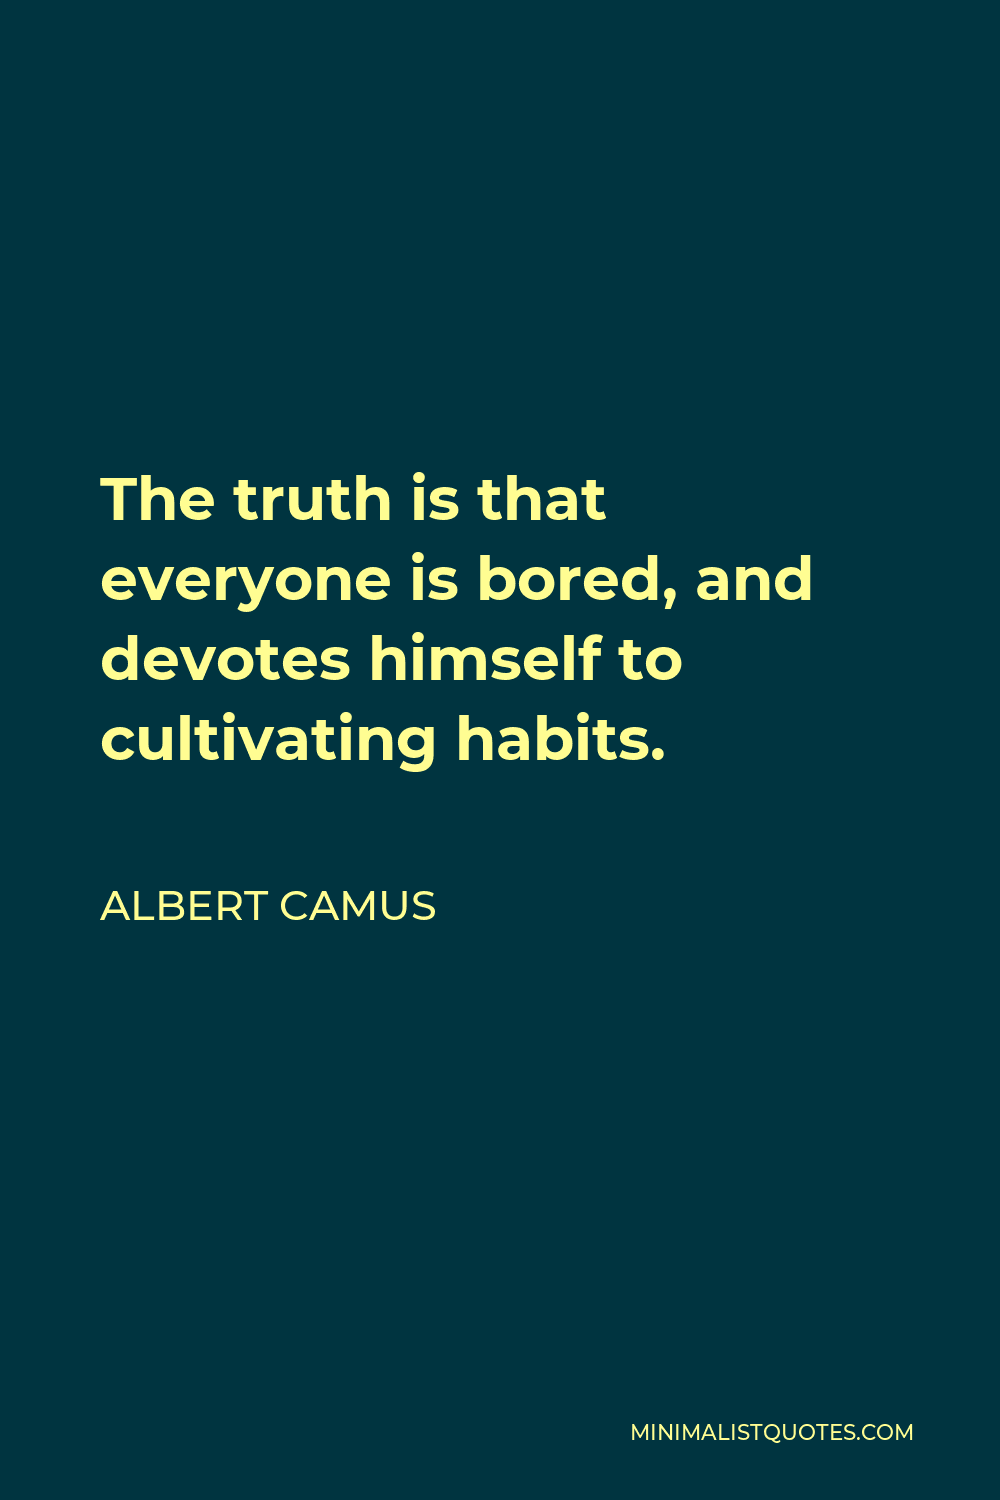 Albert Camus Quote: The truth is that everyone is bored, and devotes ...